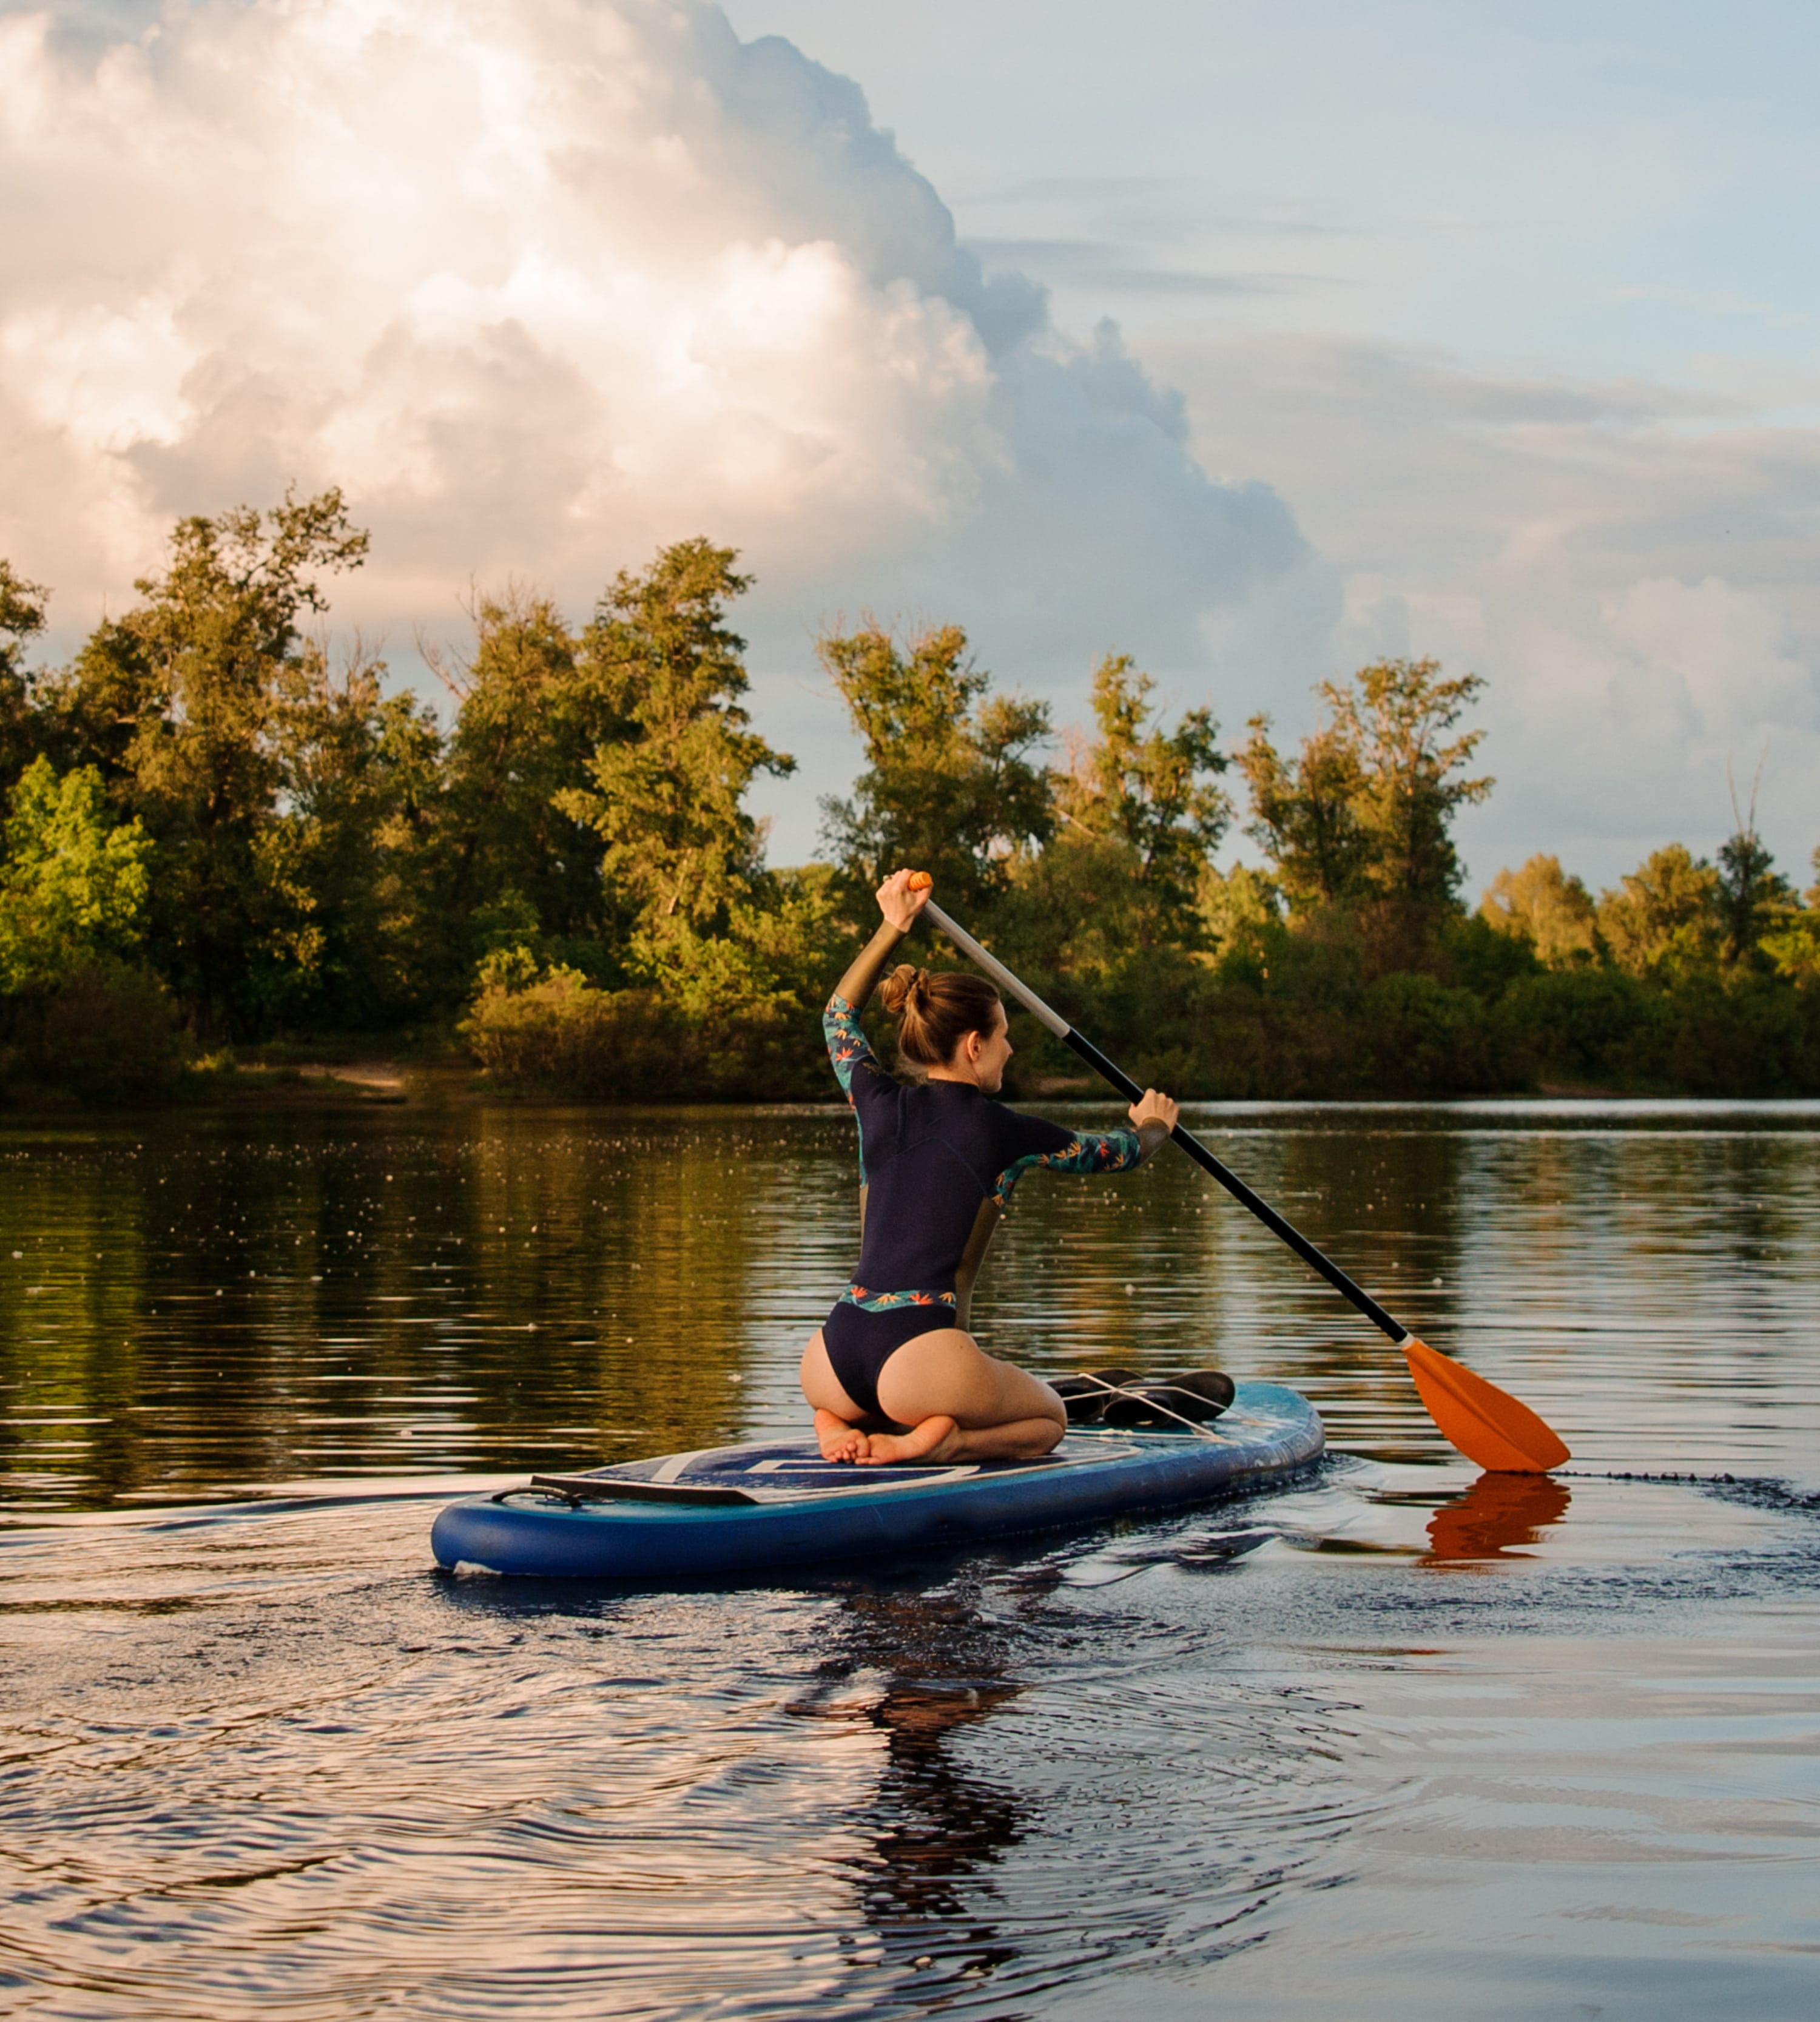 SUP and Canoe: 5 Hot Water Sports Trends in